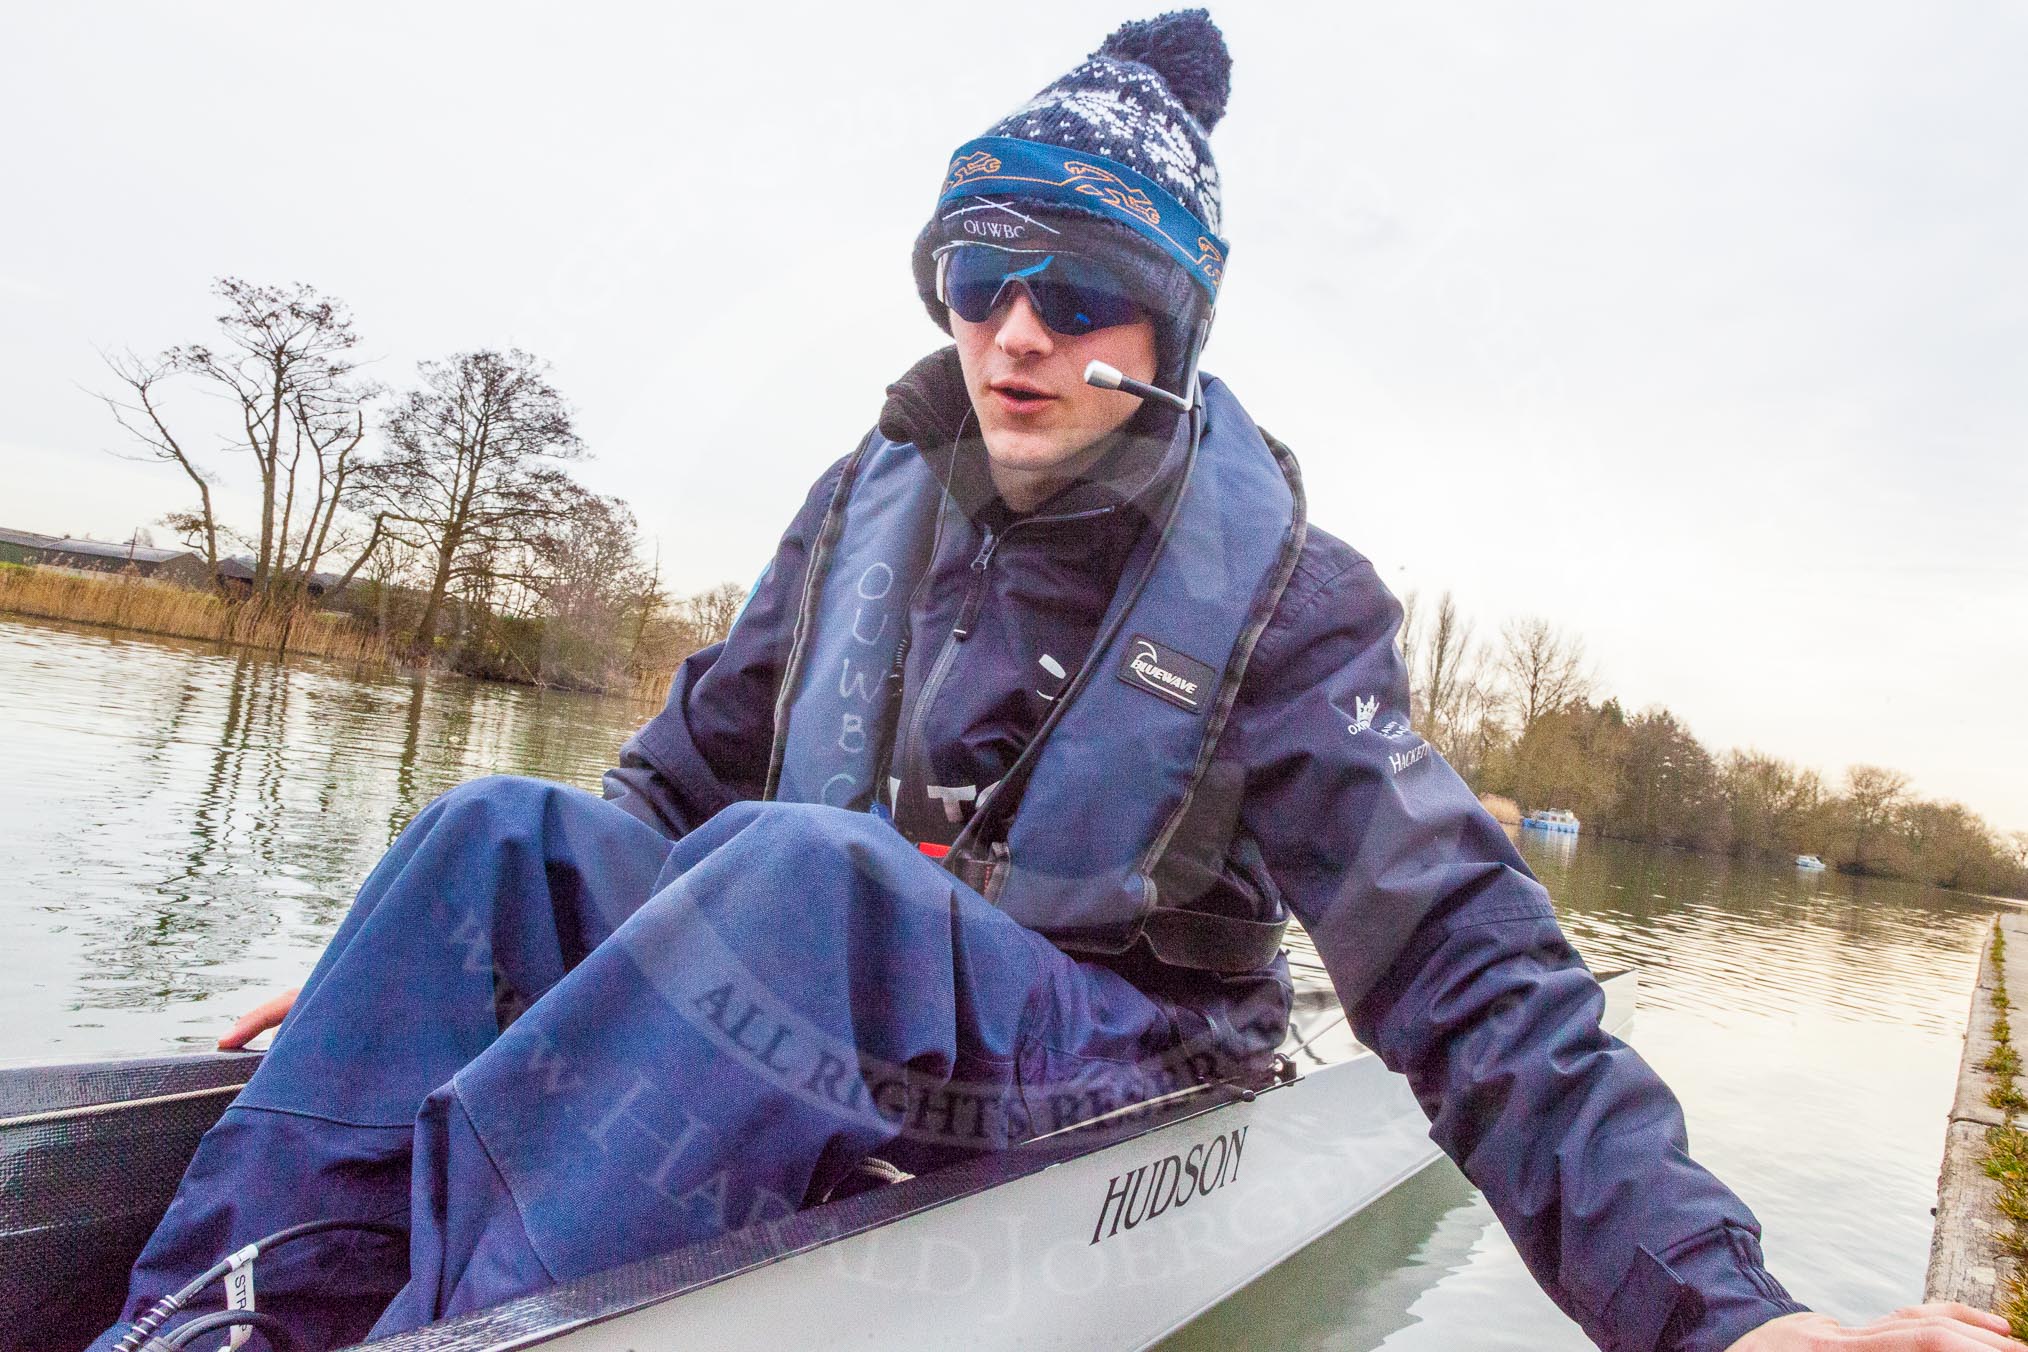 The Boat Race season 2016 - OUWBC training Wallingford: OUWBC cox Will Smith in Osiris, the reserve boat..
River Thames,
Wallingford,
Oxfordshire,

on 29 February 2016 at 15:20, image #42